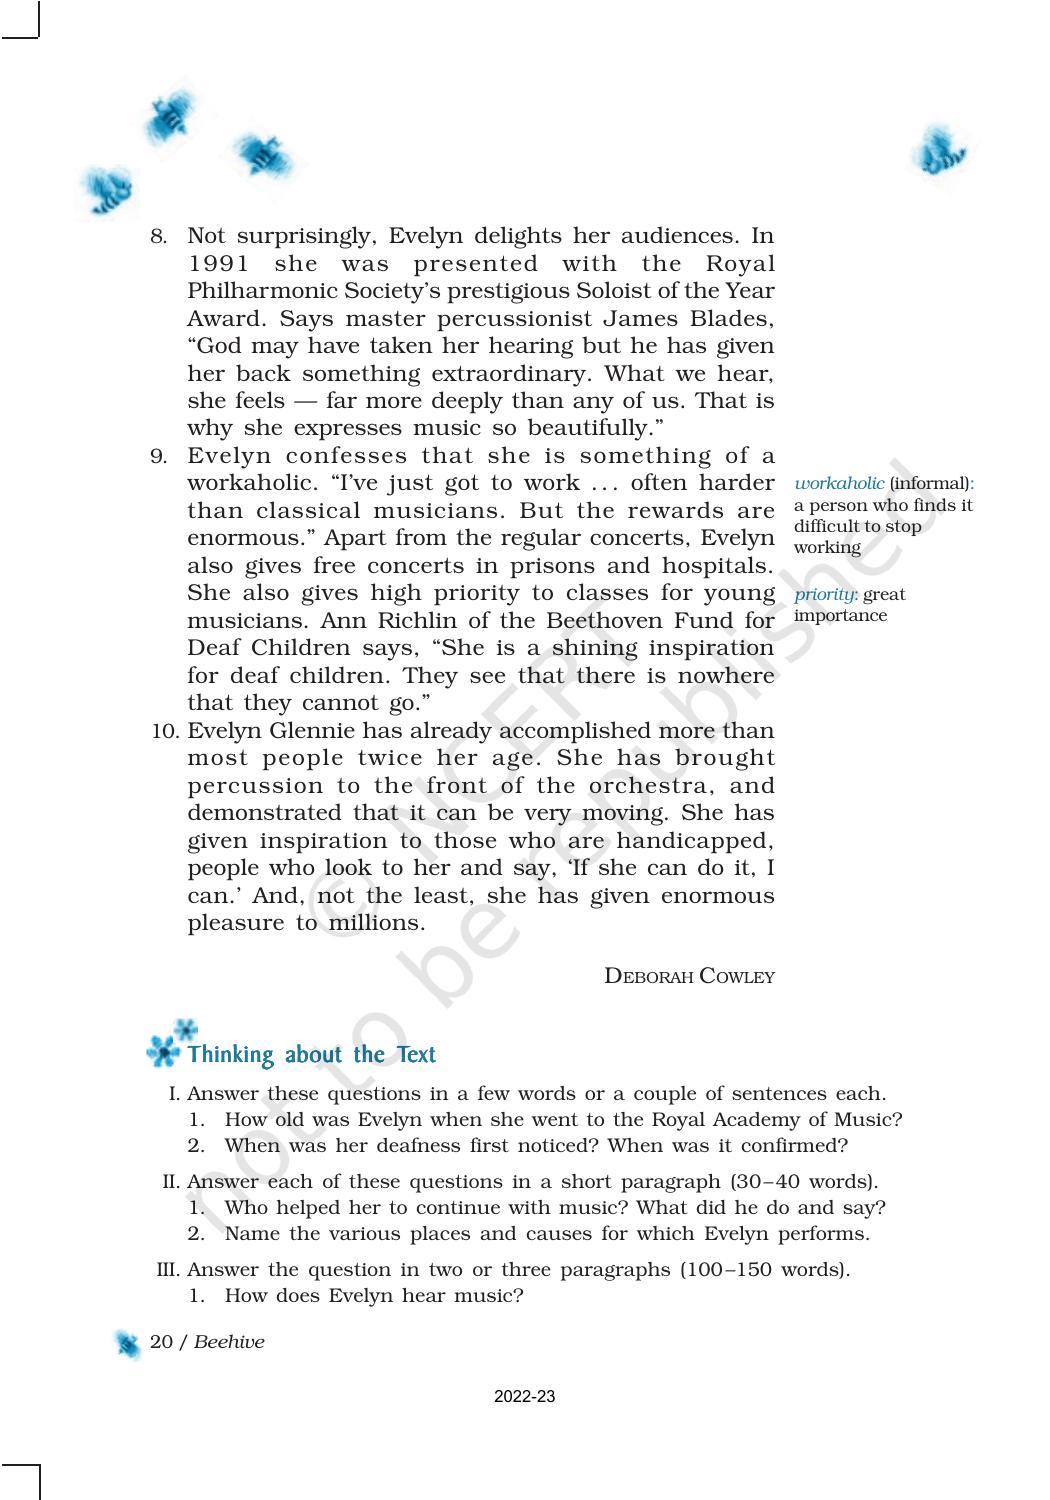 NCERT Book for Class 9 English Chapter 2 The Sound of Music - Page 4